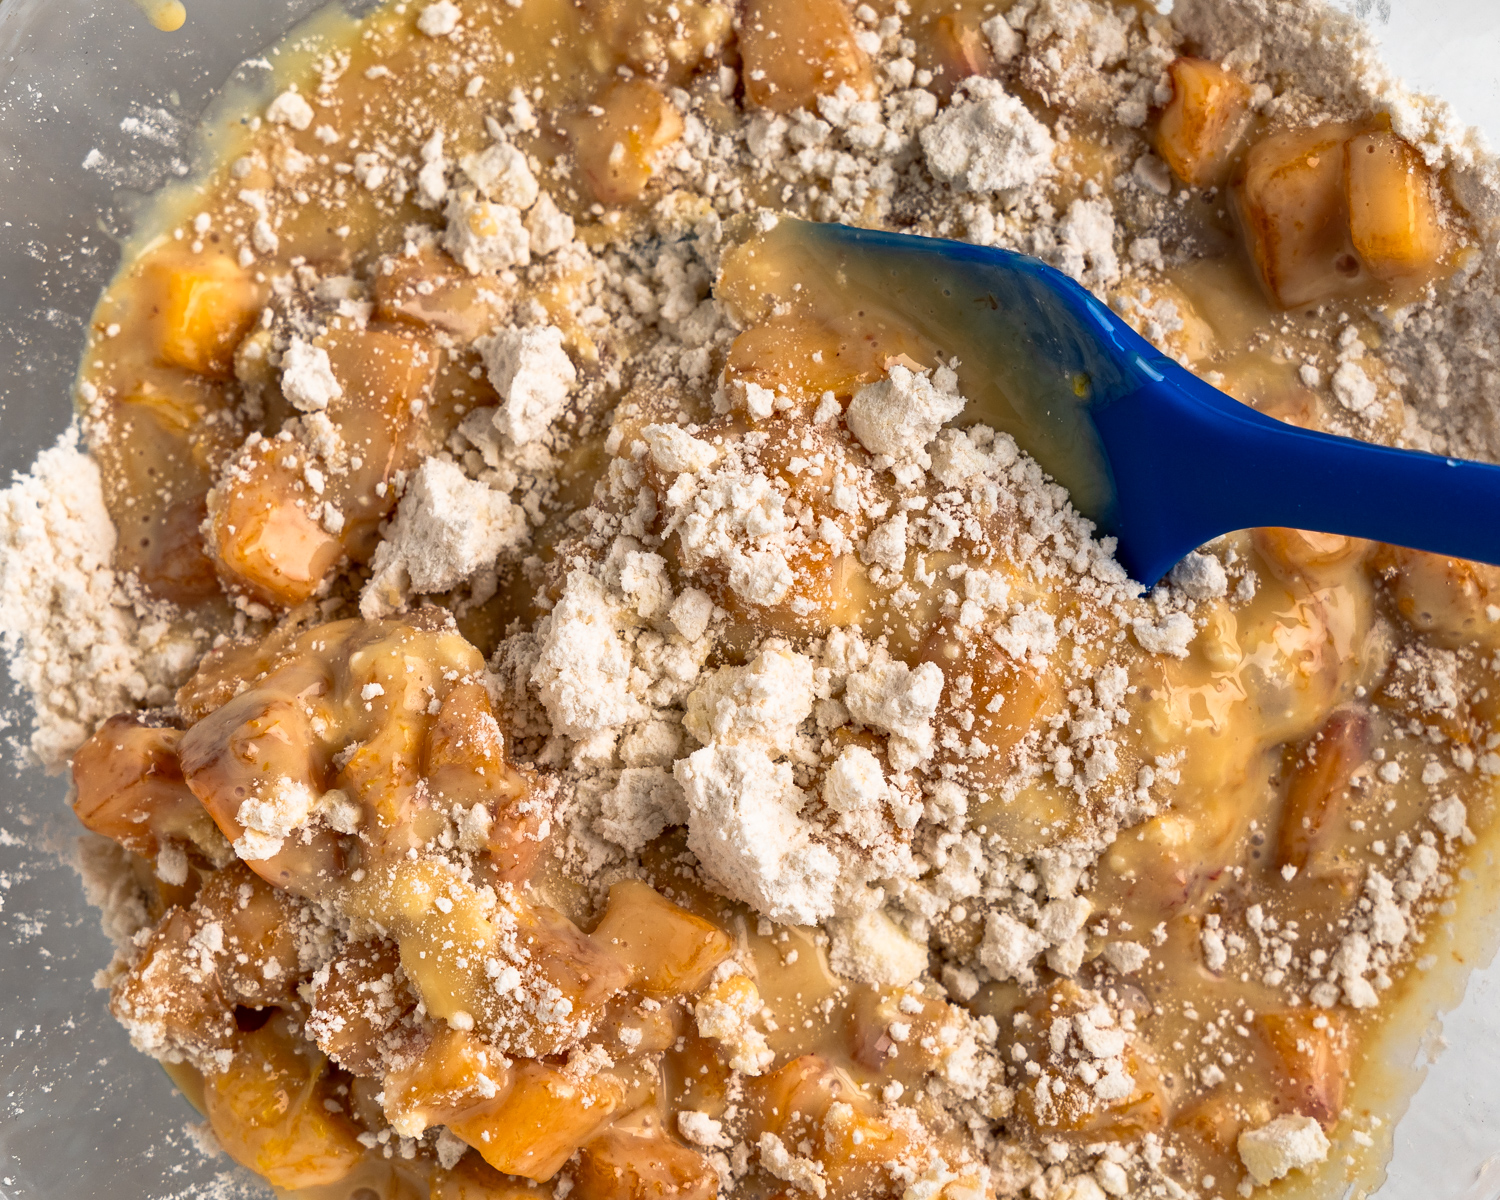 A gallery of 3 photos showing the steps to mix peach cobbler.